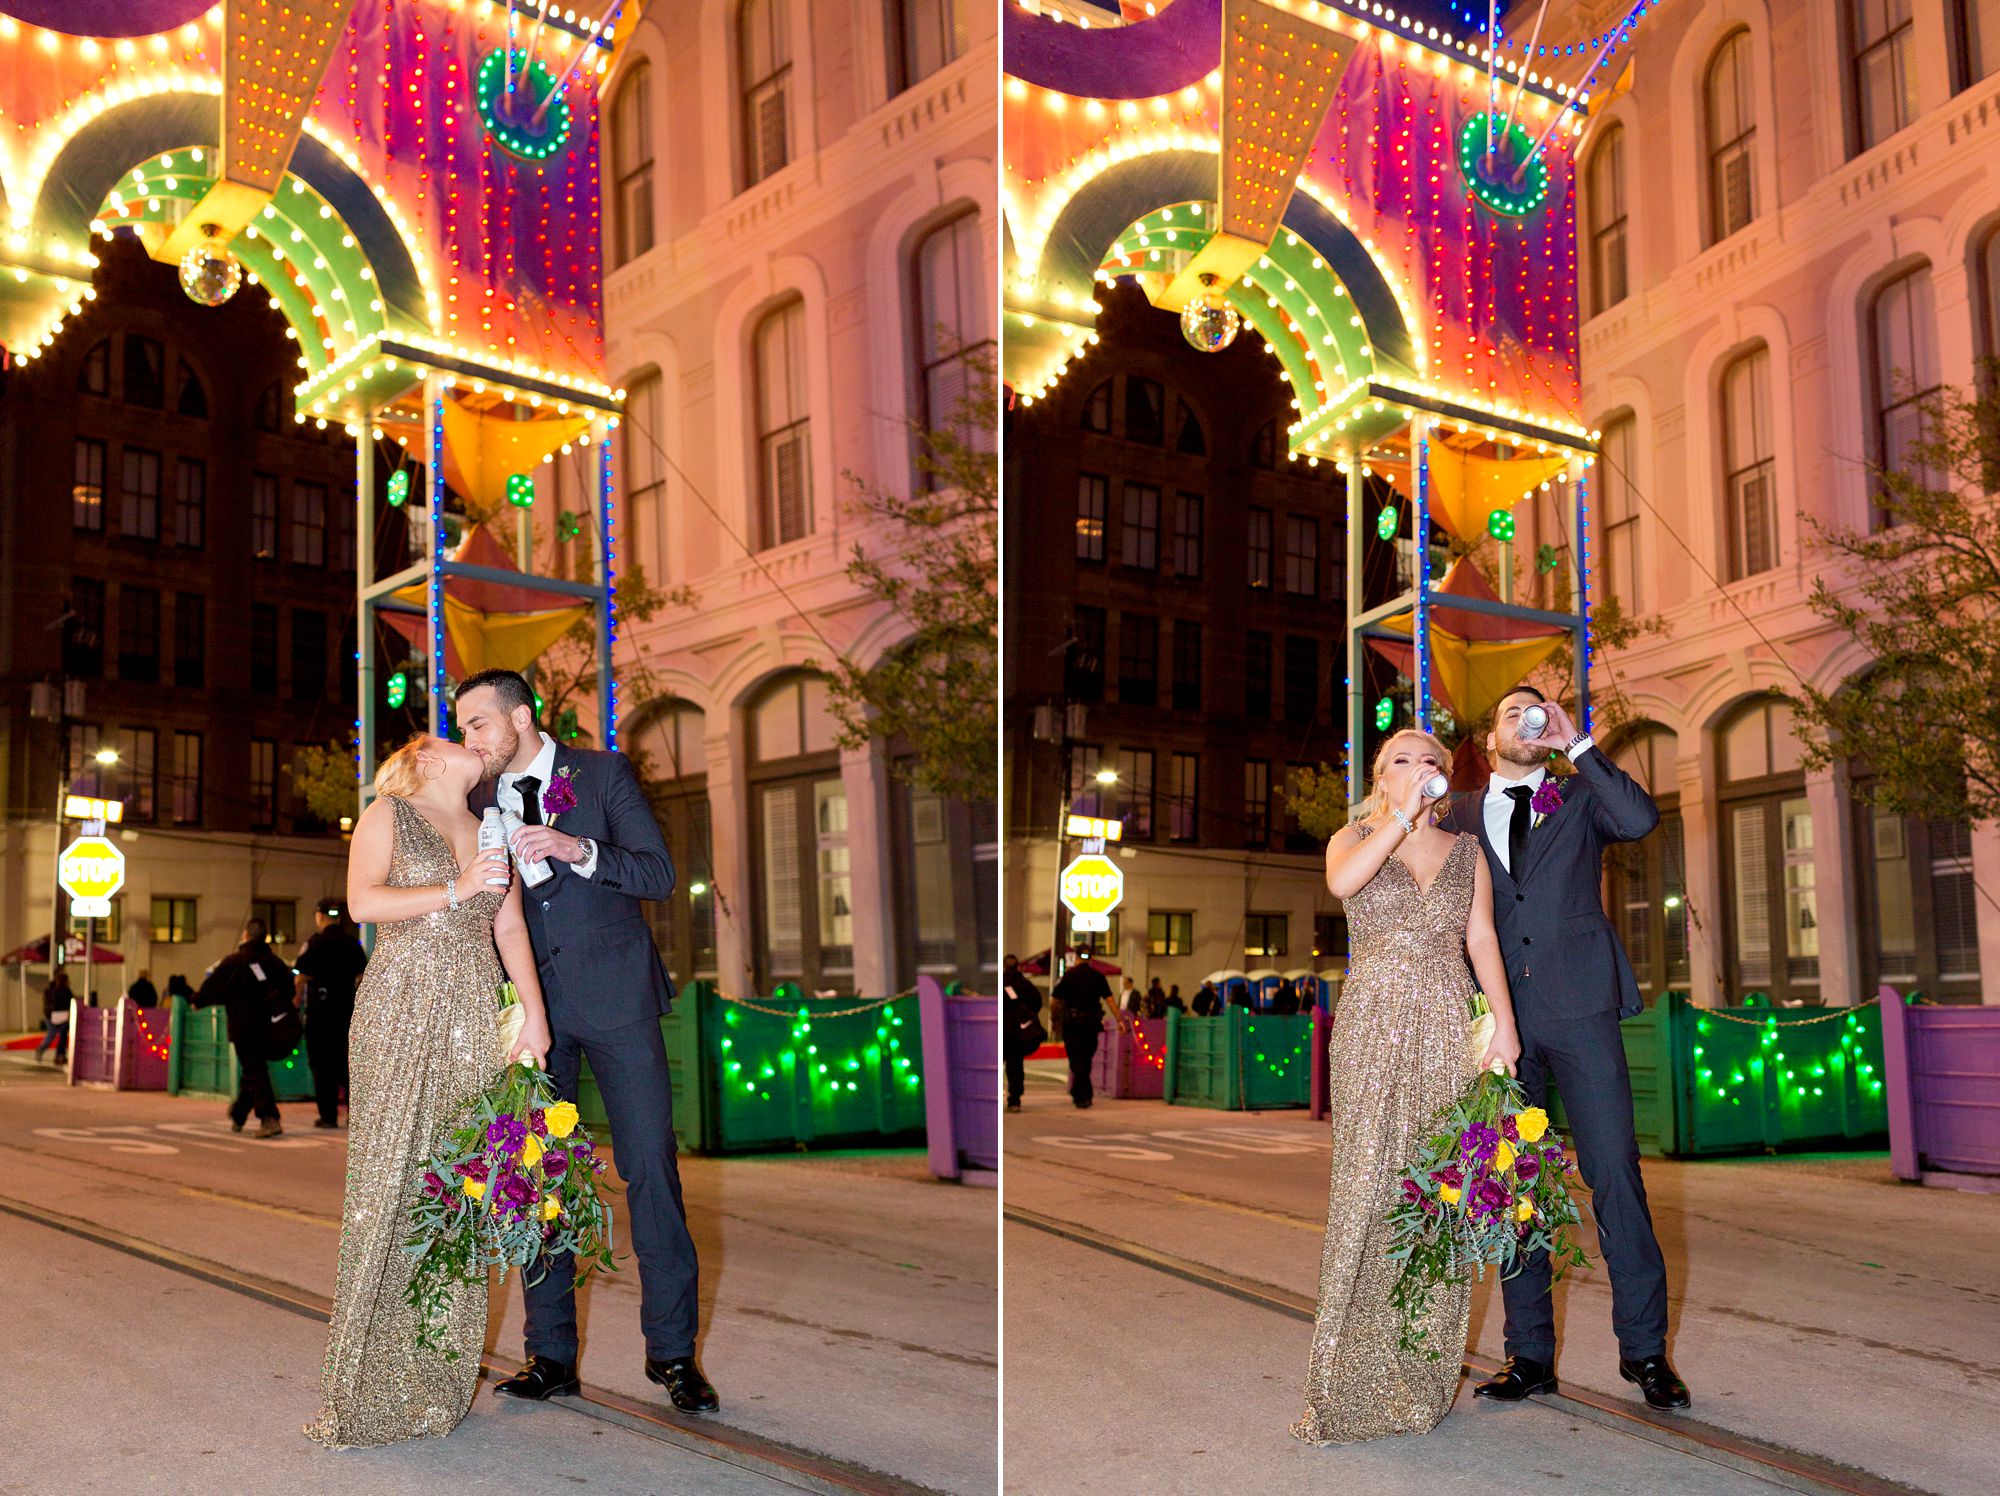 A bride and groom toast with beers under the Powell Mardi Gras Arch in Galveston, Texas.